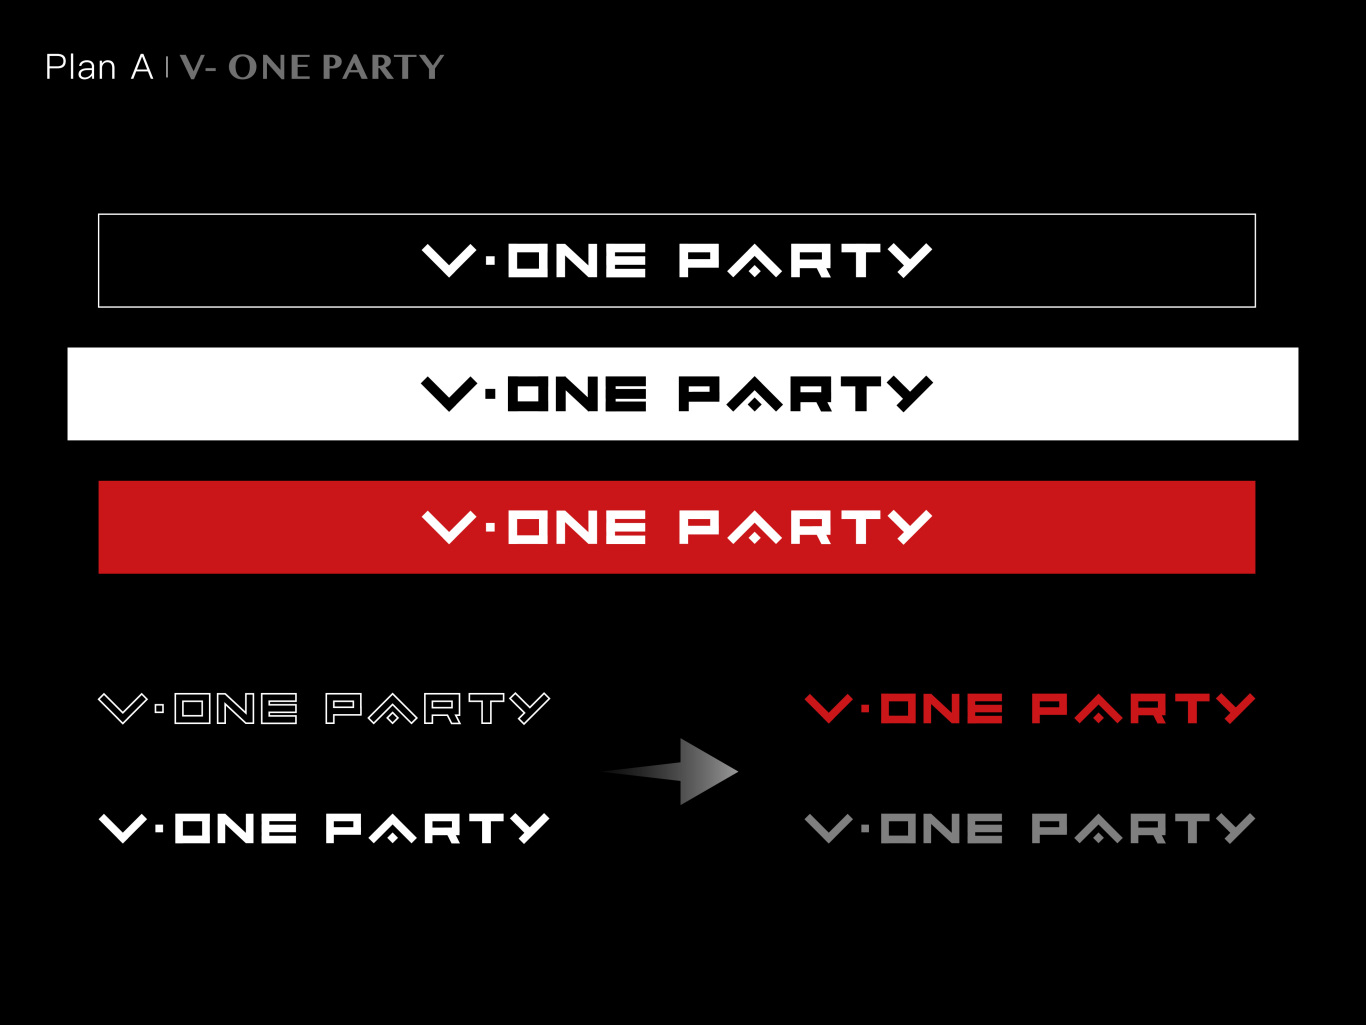 V-ONE PARTY夜店品牌图11